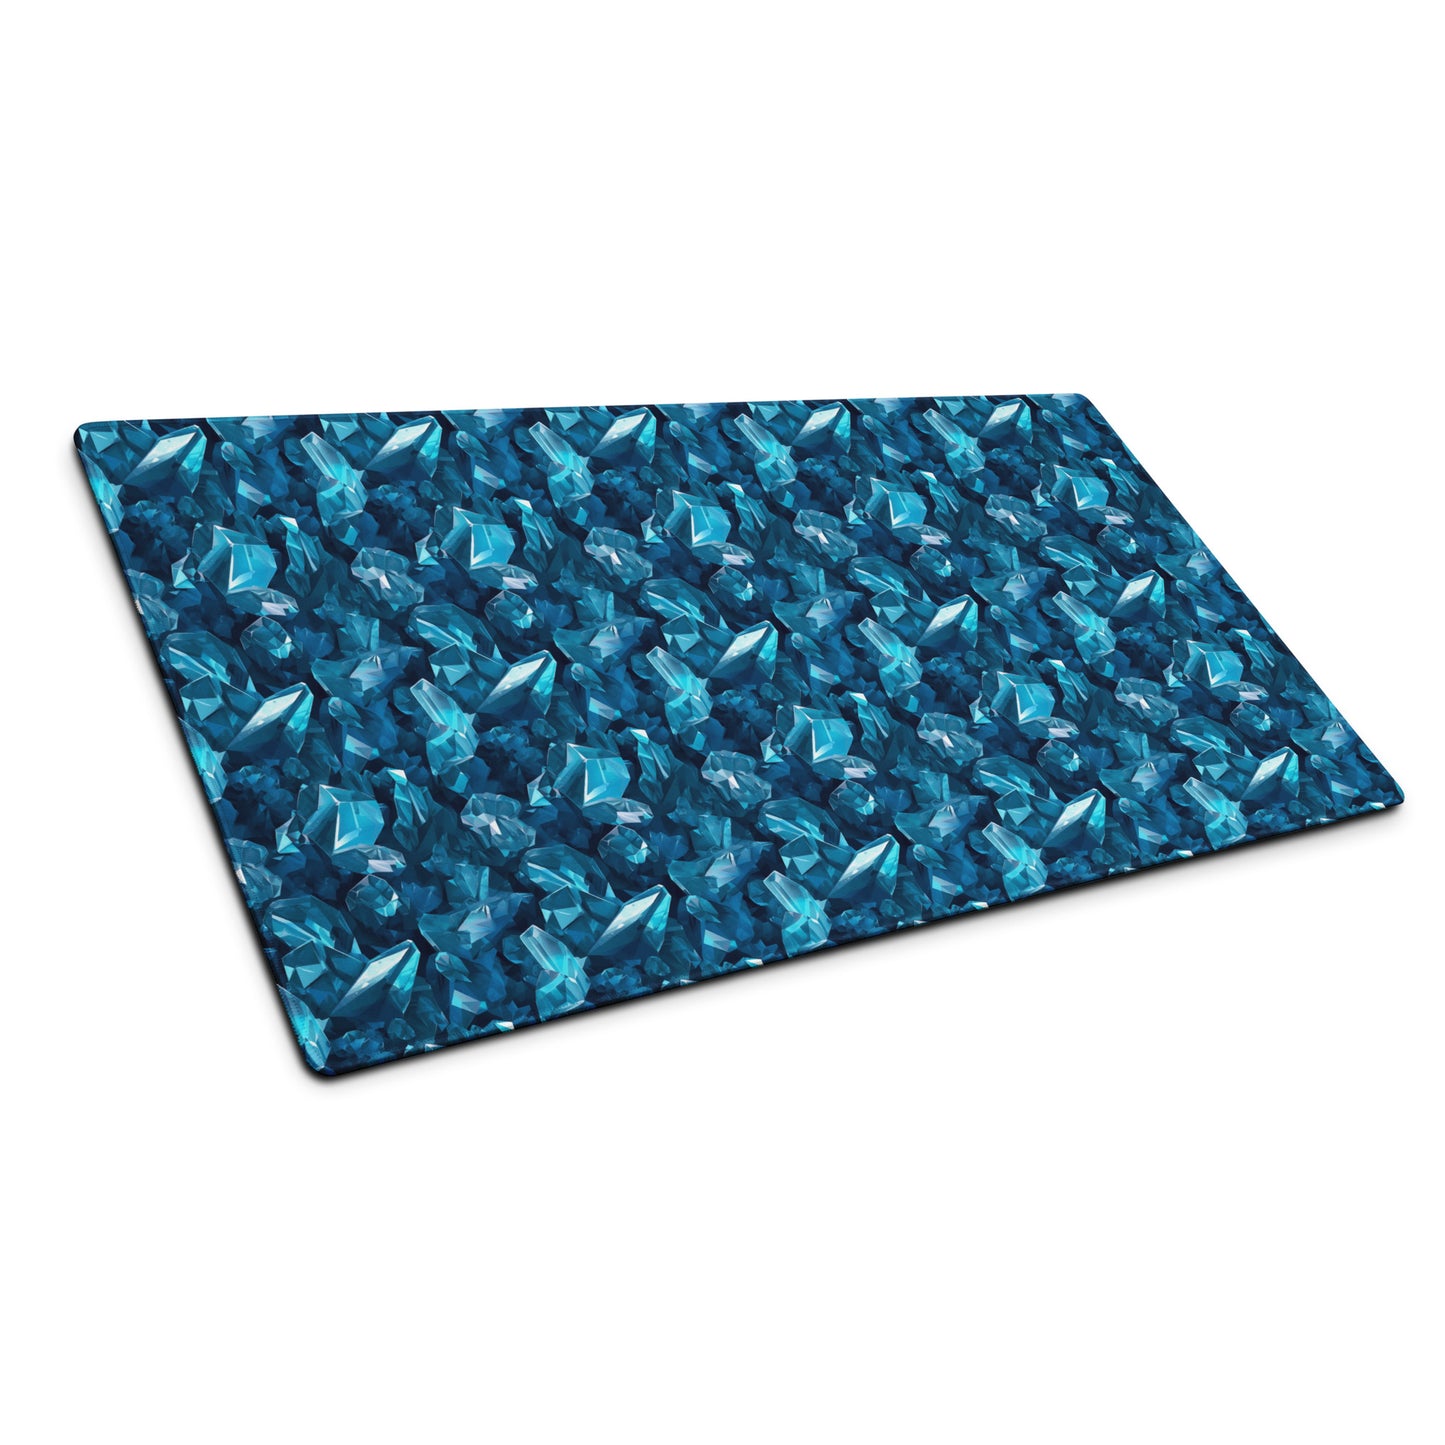 A 36" x 18" gaming desk pad with blue crystals sitting at an angle.